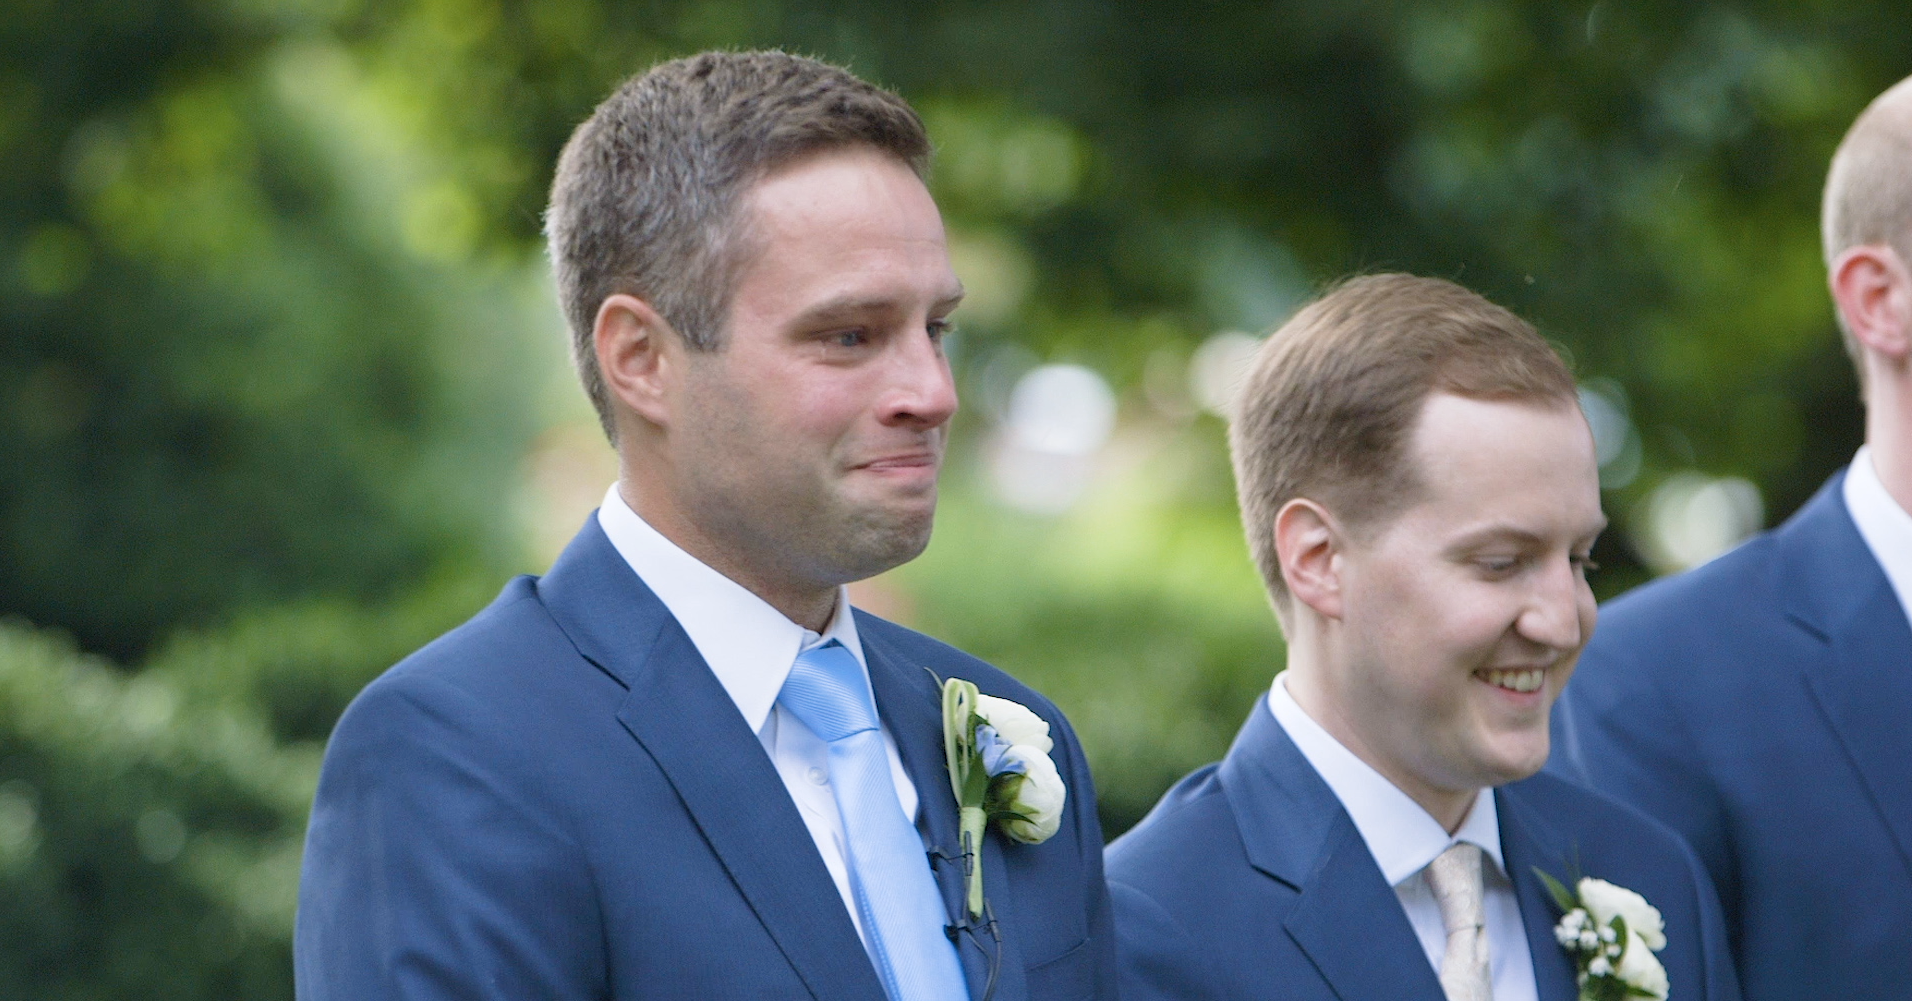 The groom stands crying tears of joy at the alter while his bride walks down the aisle.